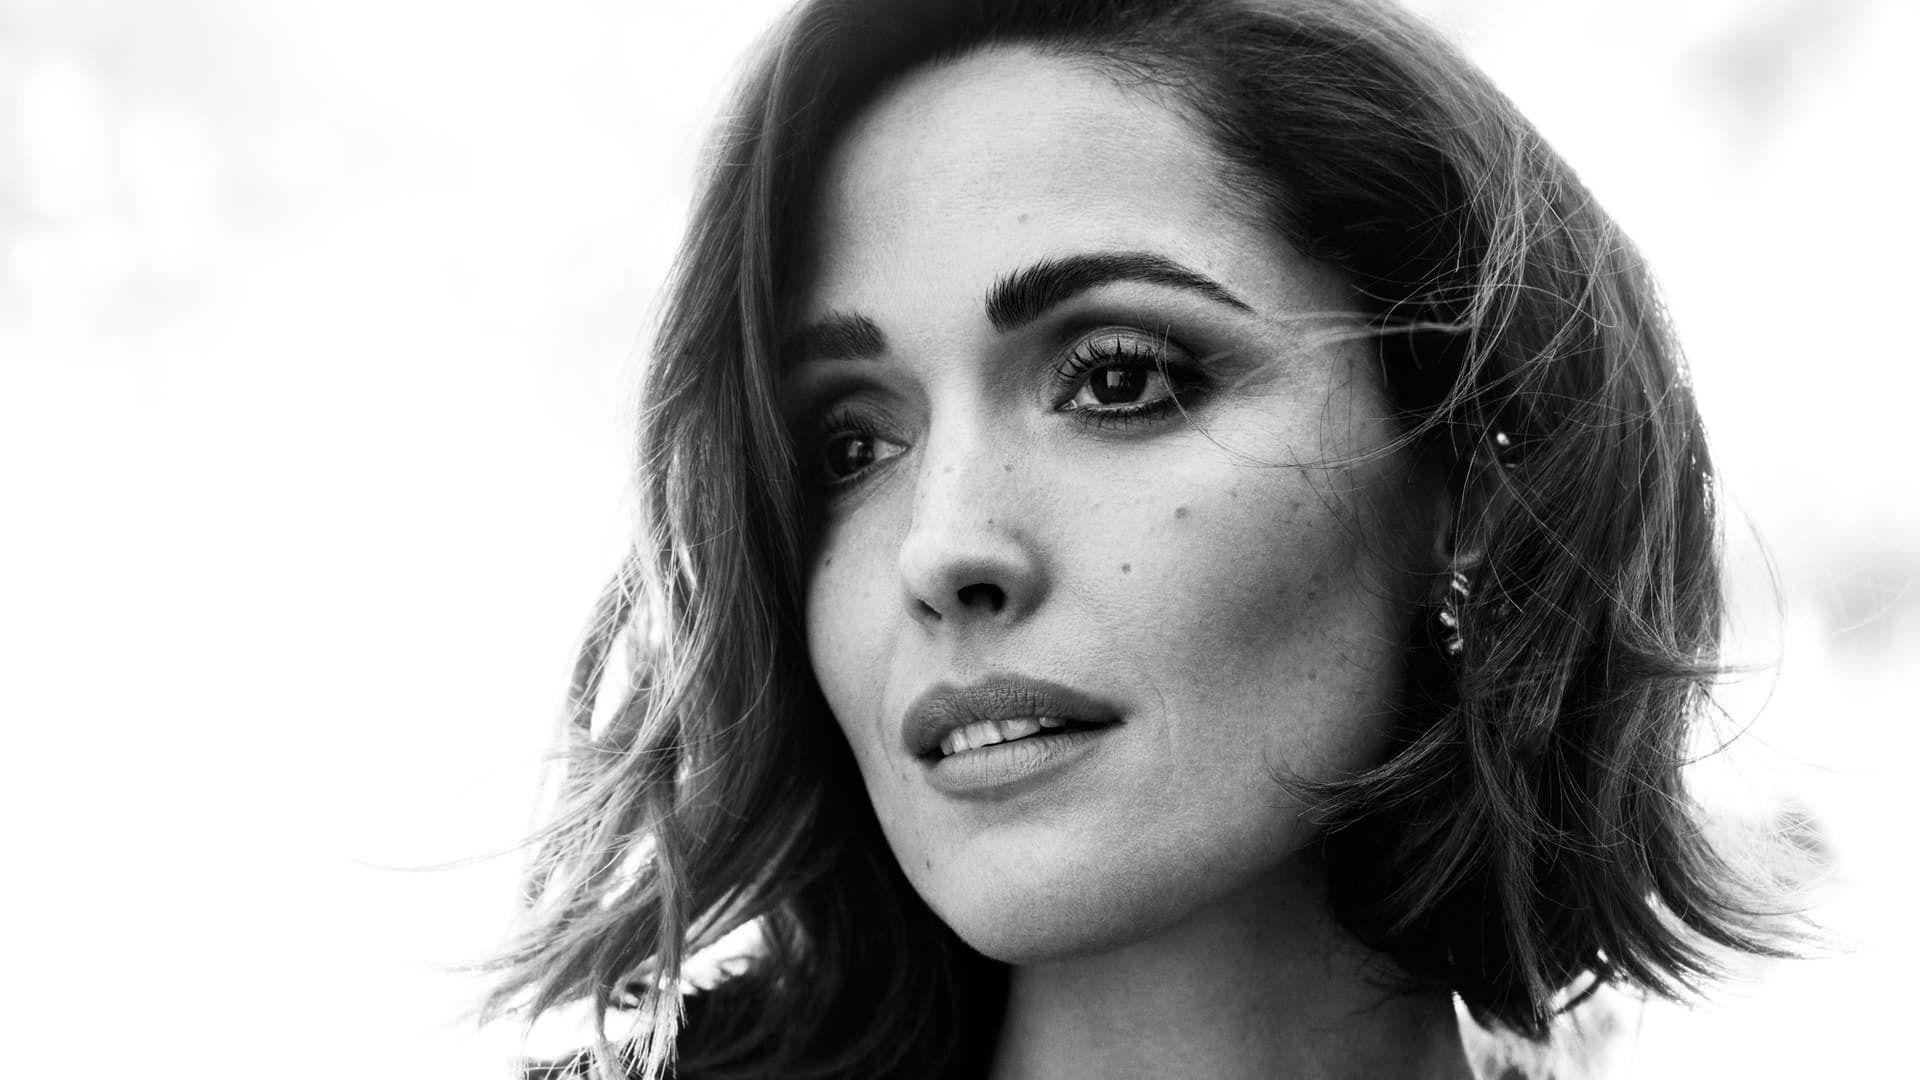 Rose Byrne Wallpaper Image Photo Picture Background